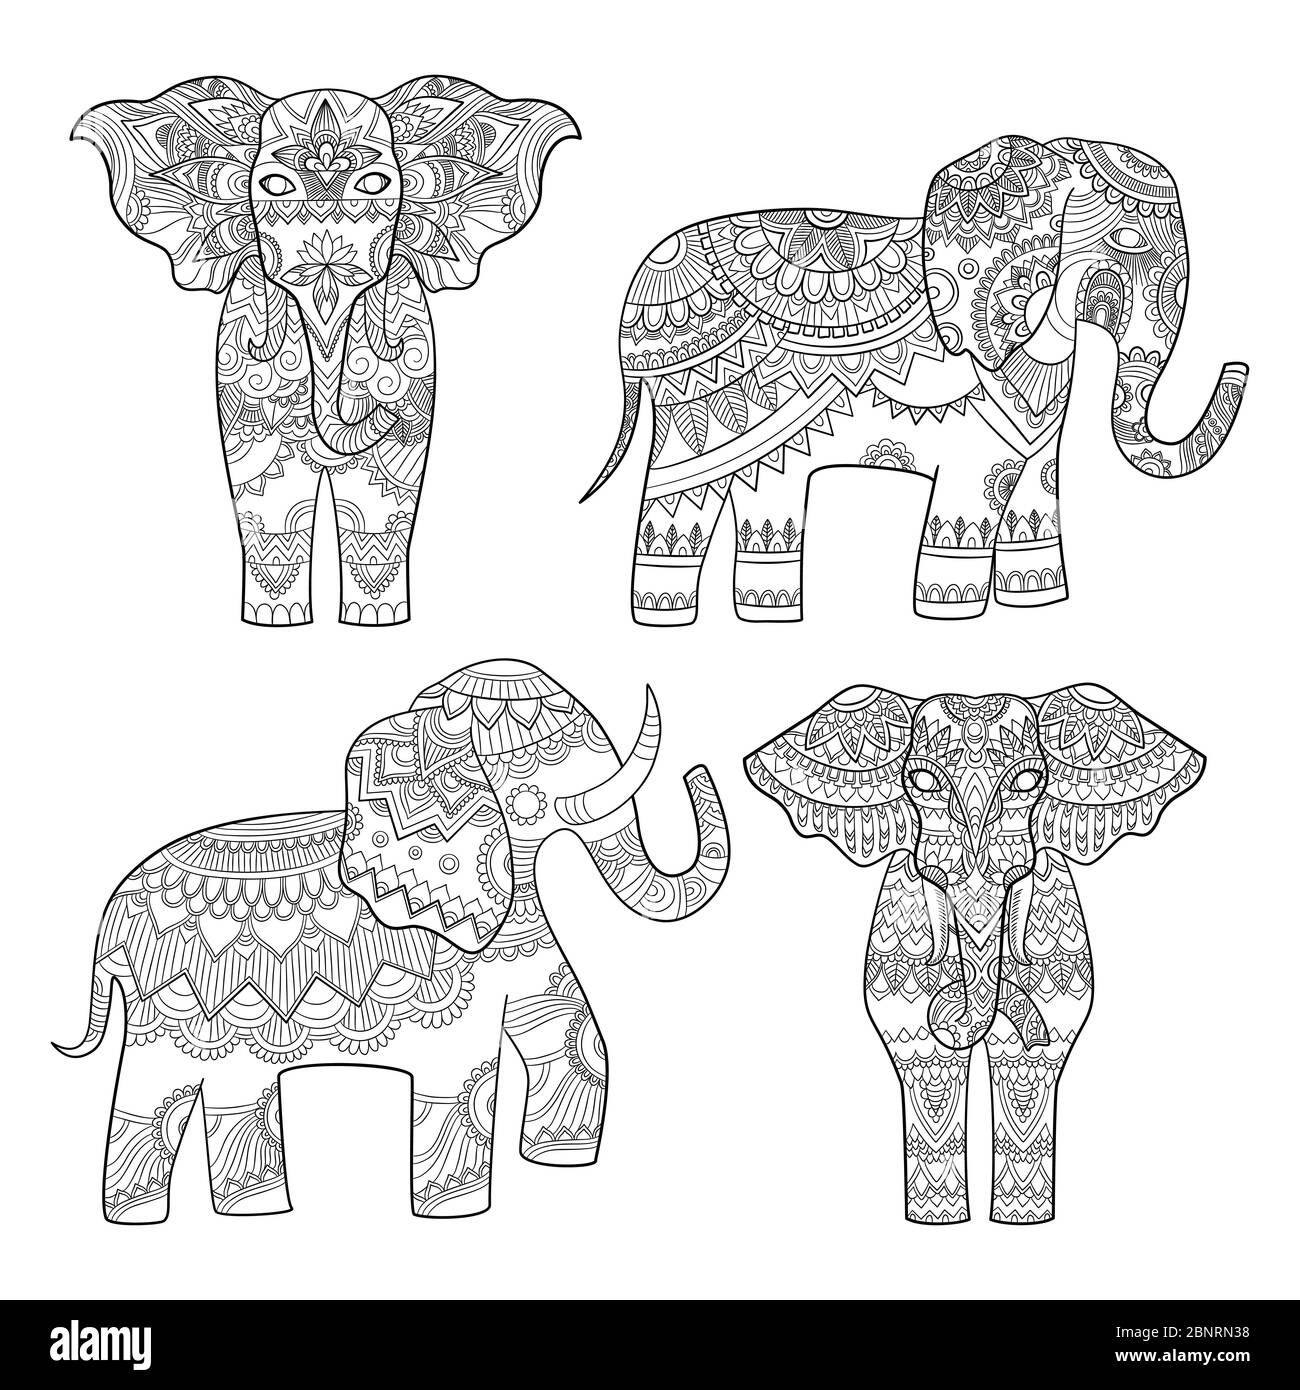 Elephant decorative pattern. Indian motif tribal royal design for adults colored pages vector illustrations Stock Vector